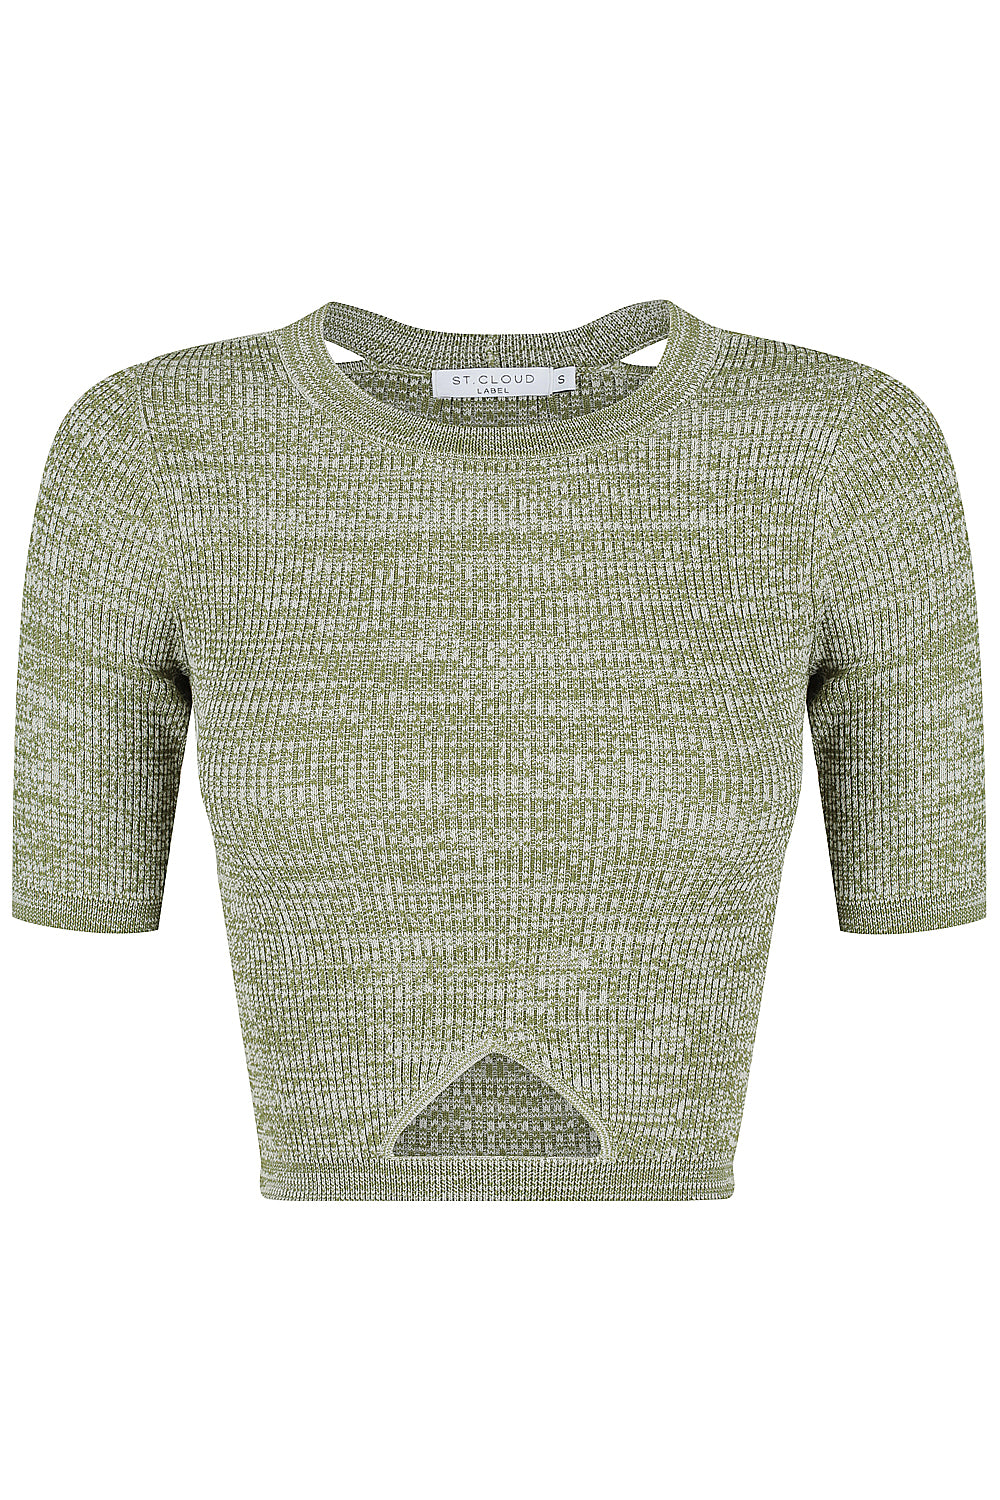 The Cut it Out Crop Knit Top - Olive / Cream